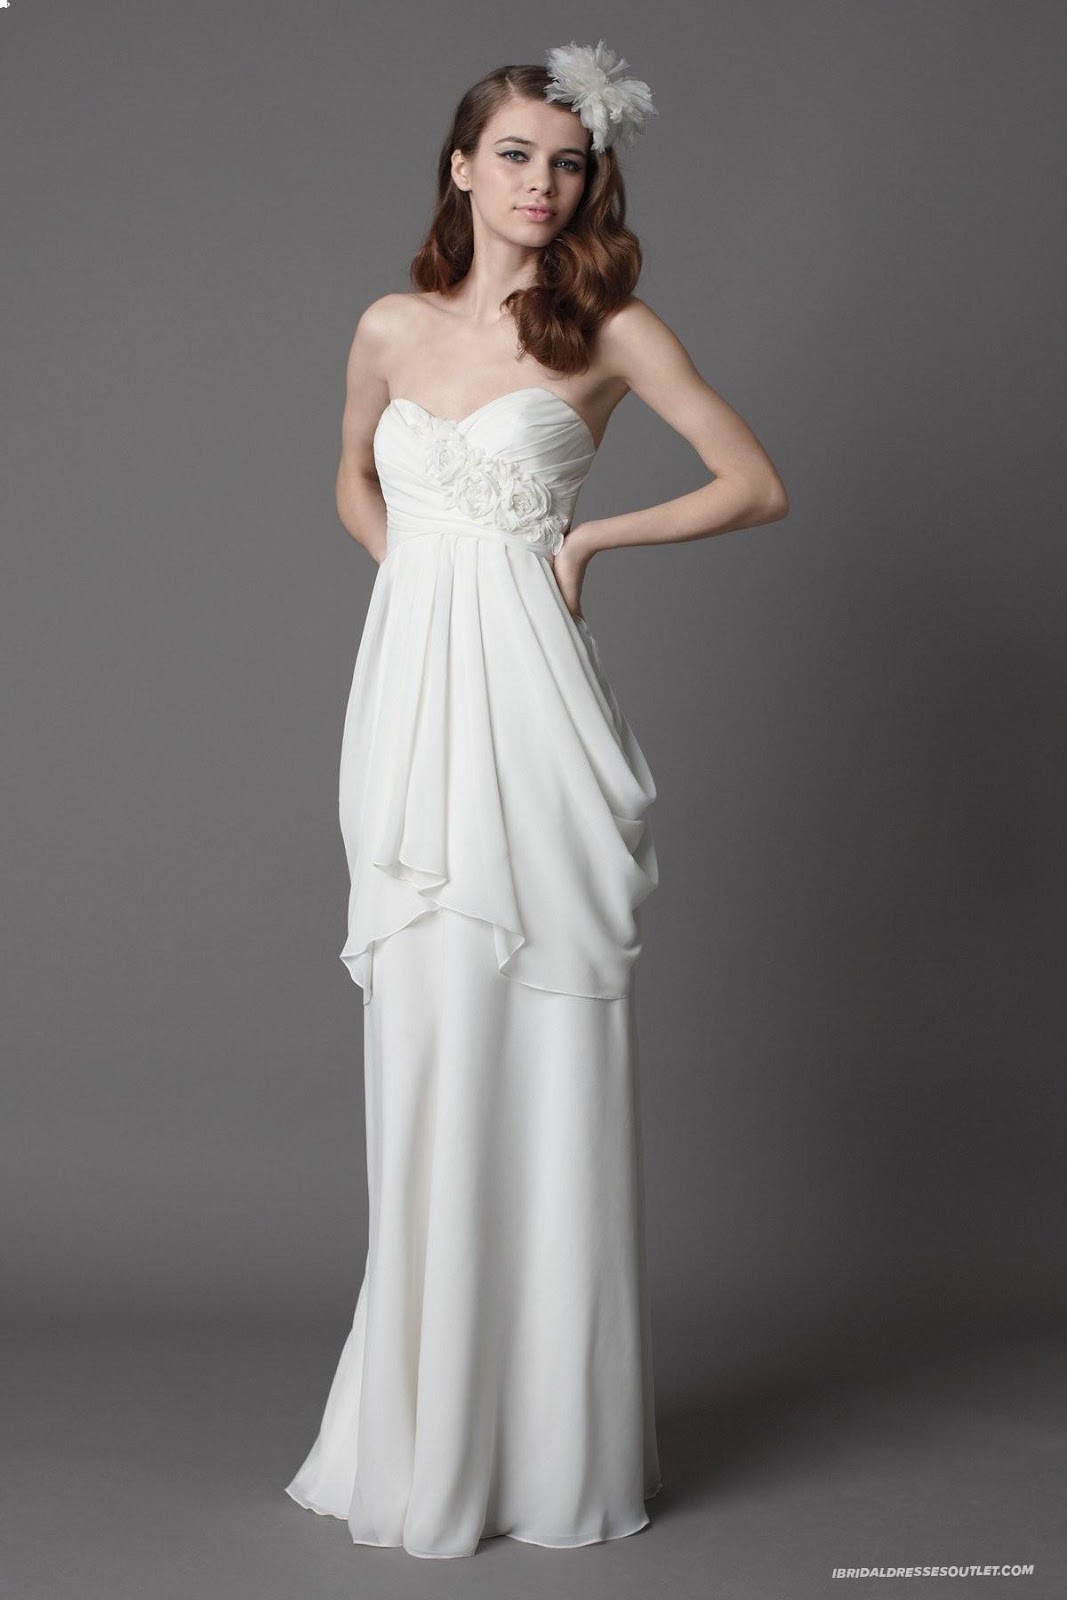 Choose Your Fashion Style: Casual Wedding Dresses for Outdoor Weddings